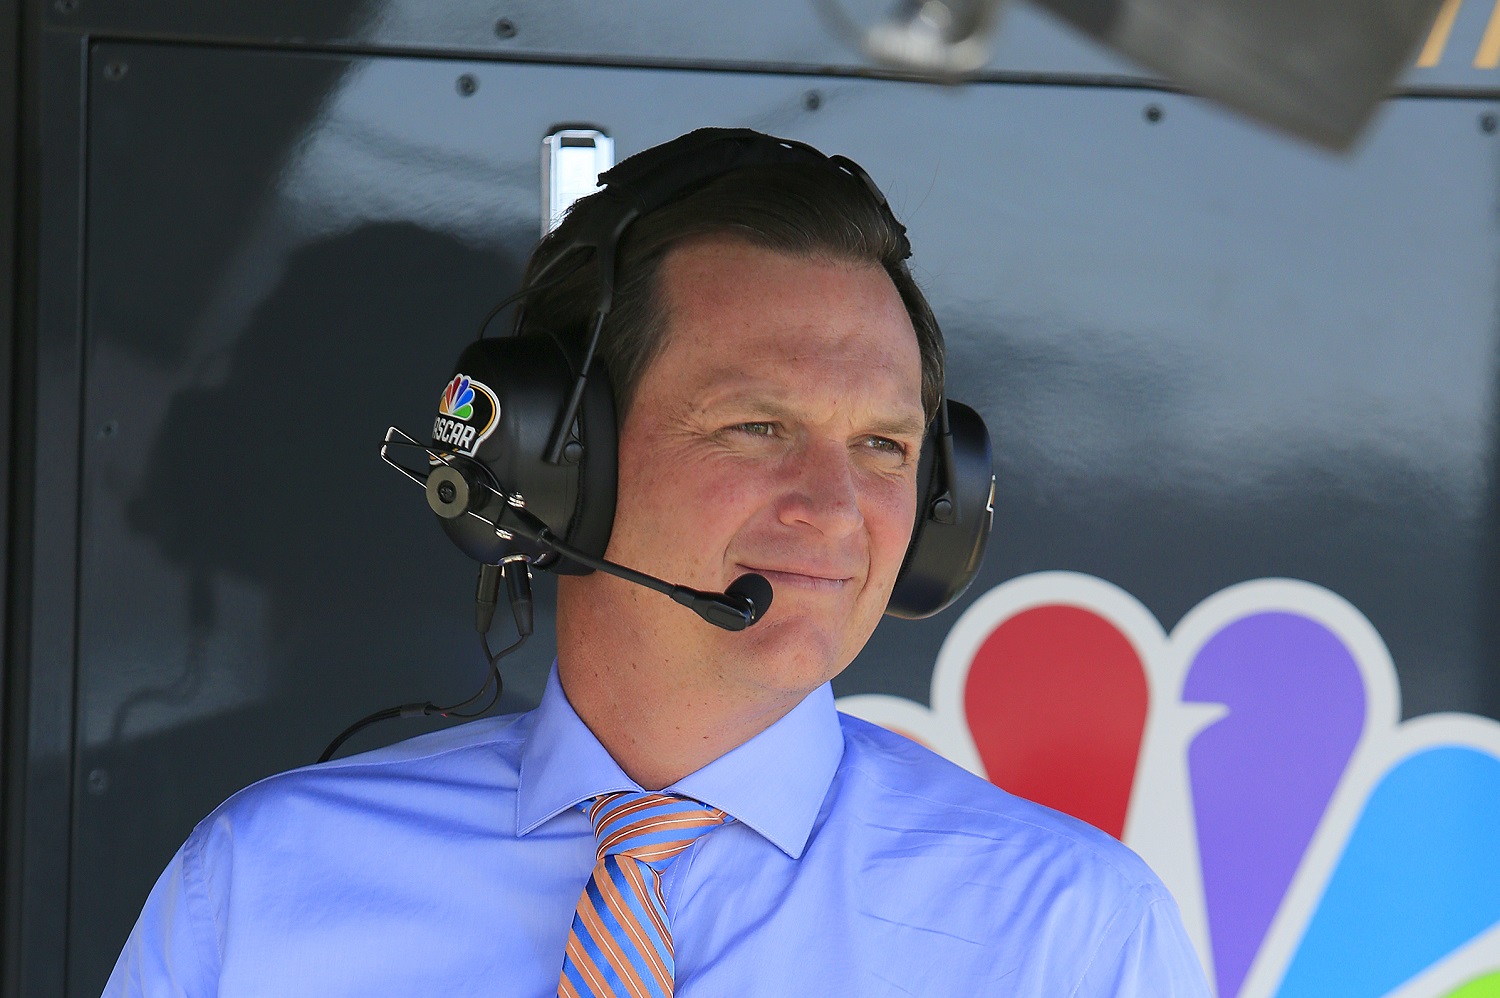 Why Is Steve Letarte Missing From the NASCAR Championship 4 on NBC?